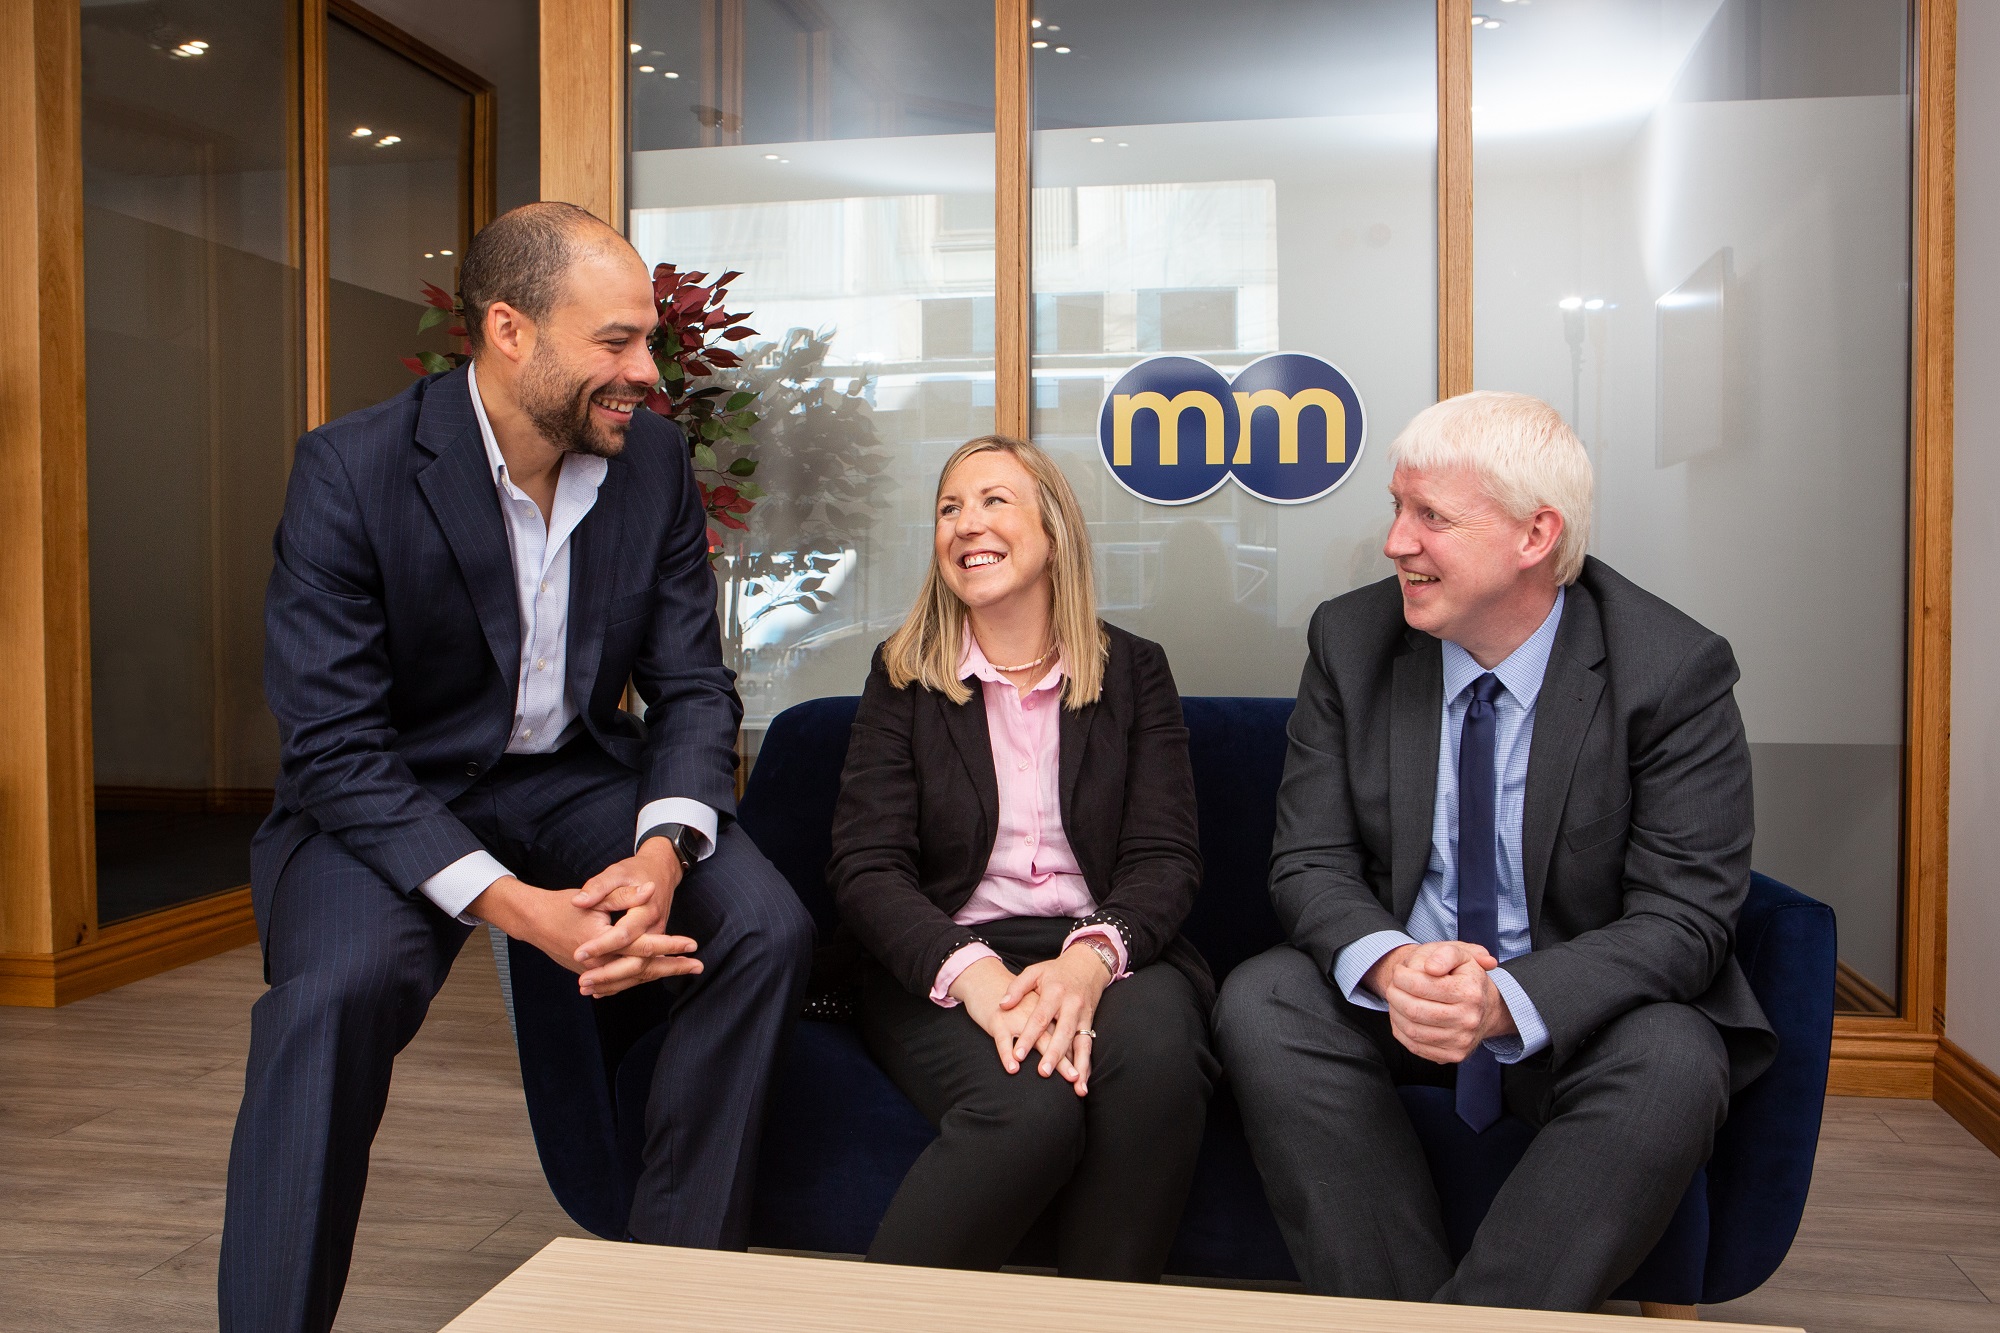 Wealth management arm of Macleod & MacCallum acquired